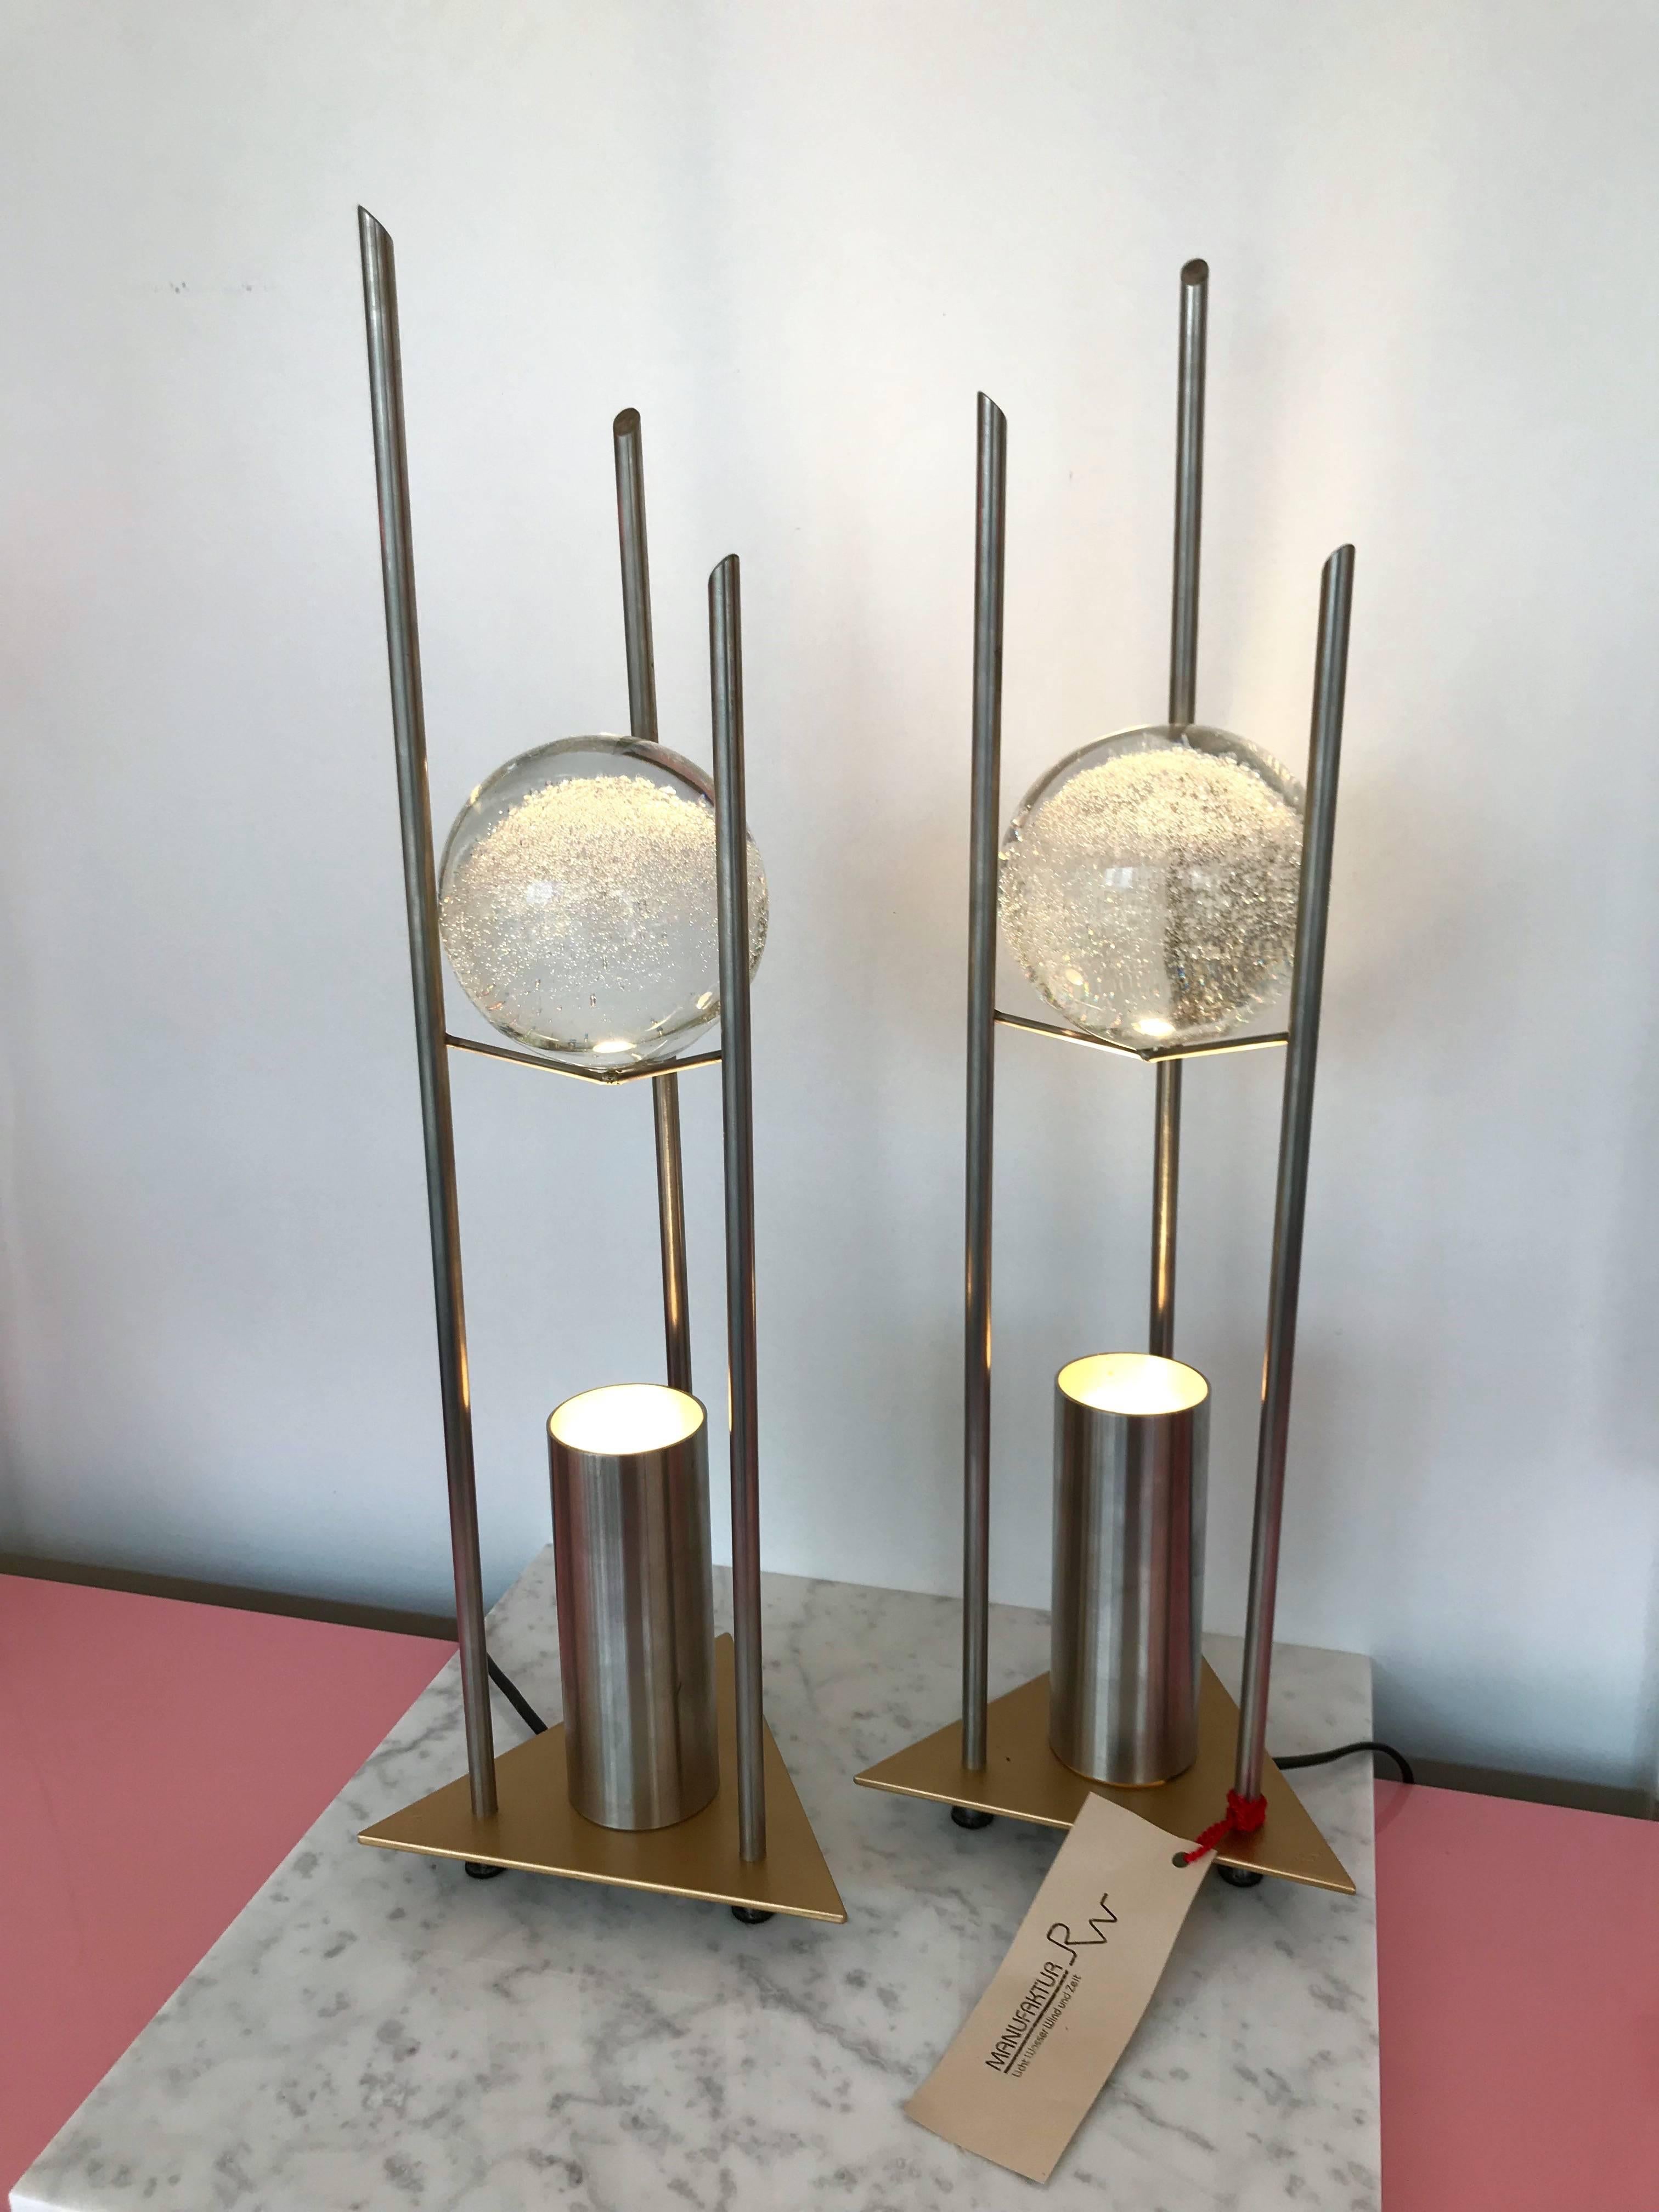 Pair of Lamps Glass Ball Sculpture by RW Manufaktur, Germany, 1980s For Sale 1